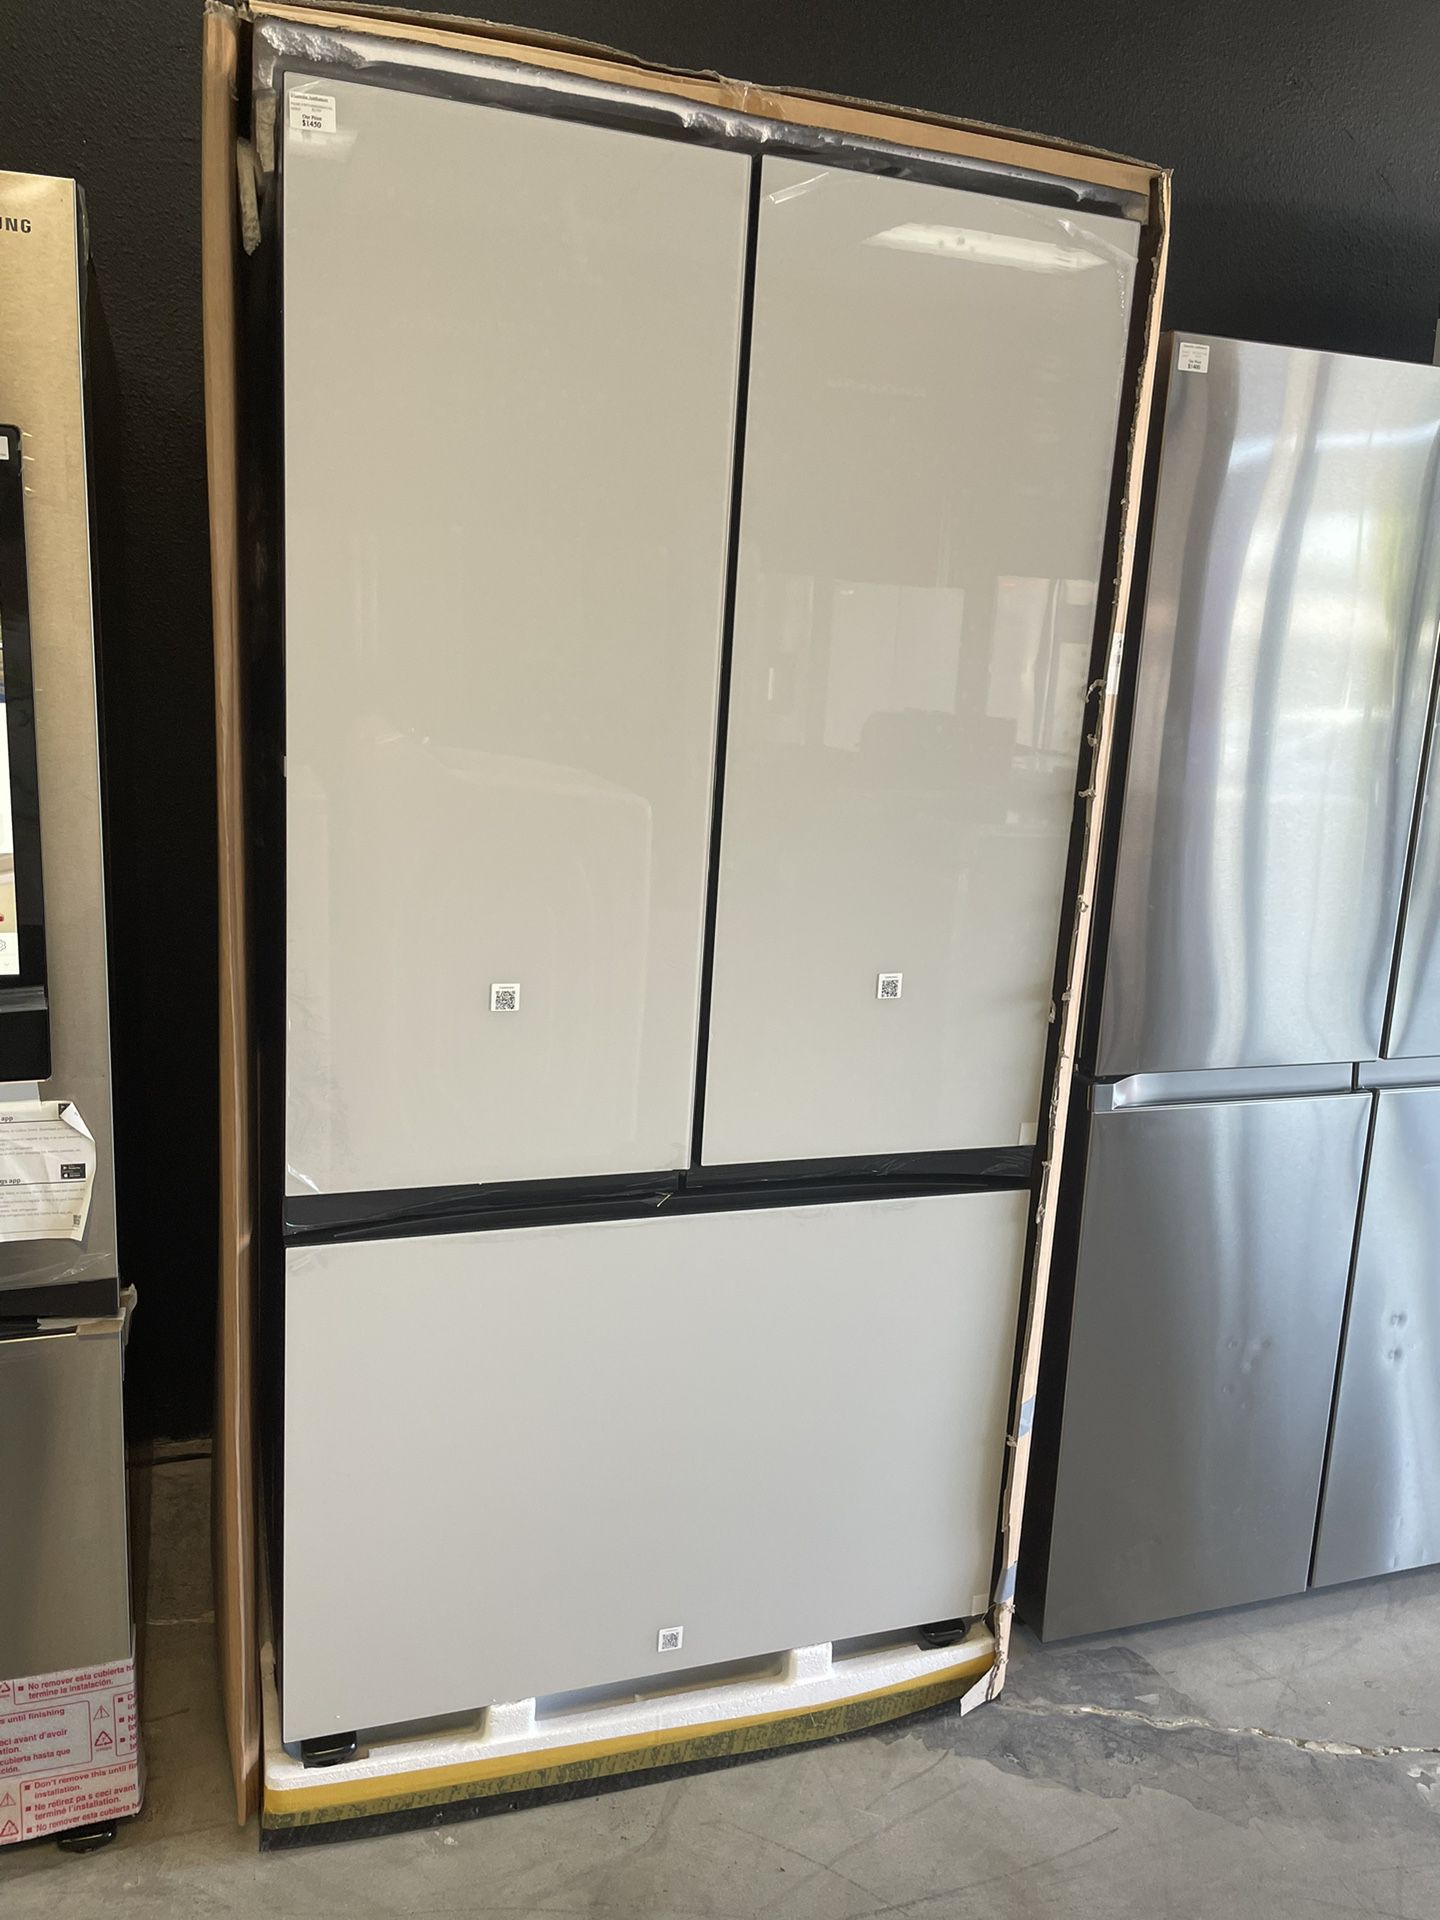 Samsung French Door Bespoke Counter Depth Refrigerator With White Glass Panels 